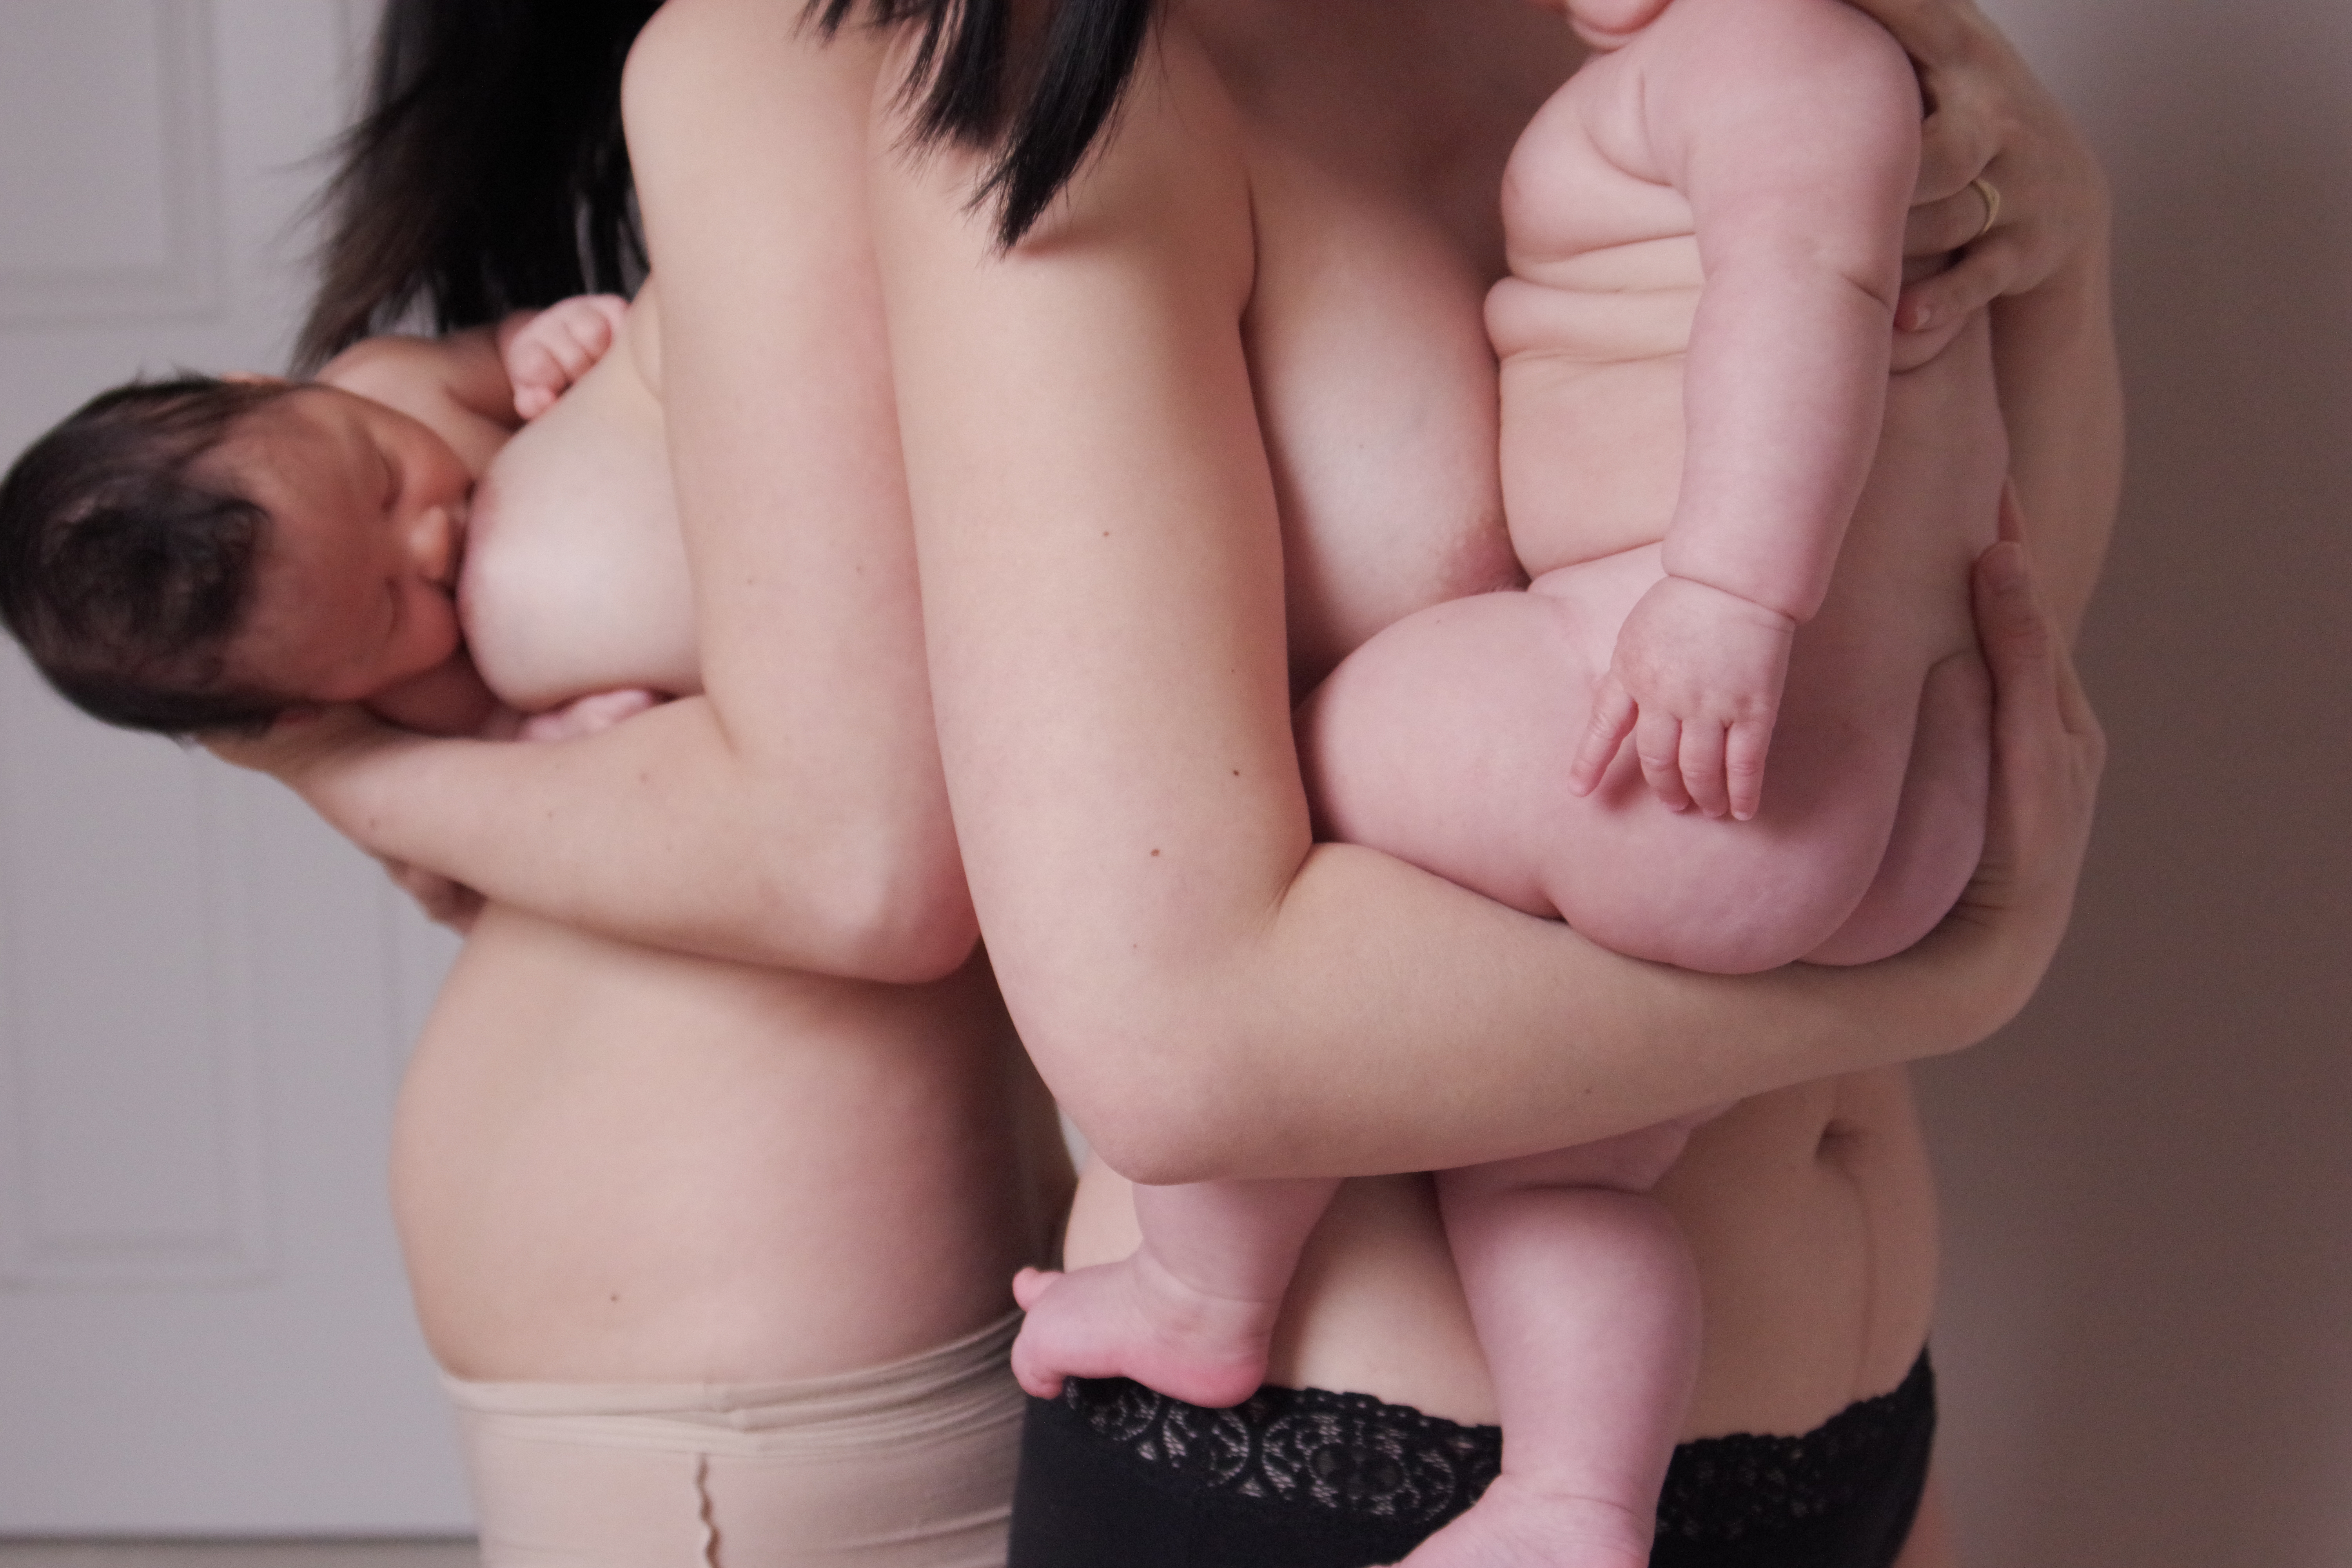 Two women stand naked holding their babies. One is chestfeeding while the other holds a 5 month old sitting up. The women's heads are cropped out, focussing on their bare skin torsos.